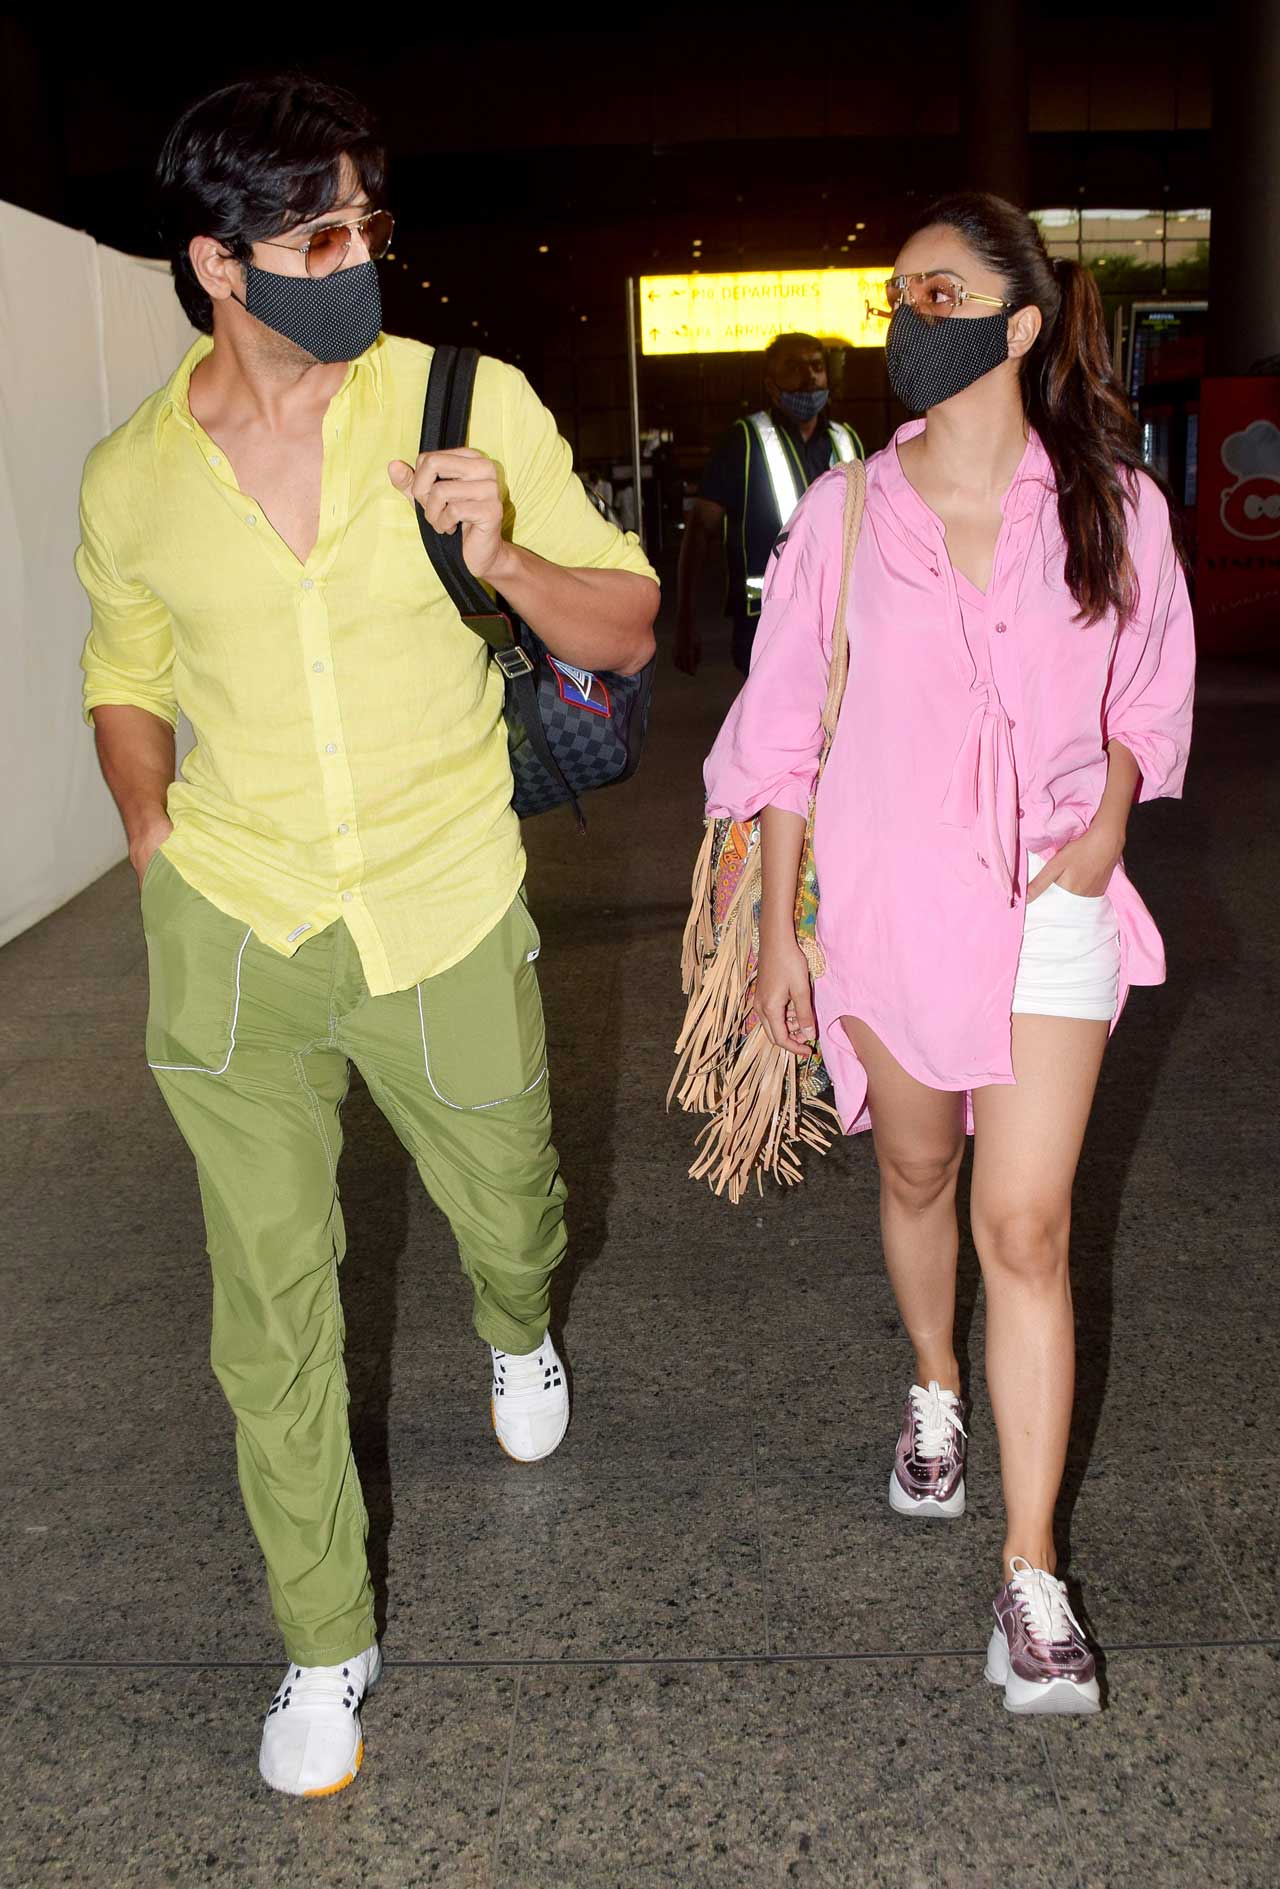 Though the duo is yet to make their relationship official, the rumours about them being together are rife. It is also said that Karan Johar played the cupid between Kiara and Sidharth.